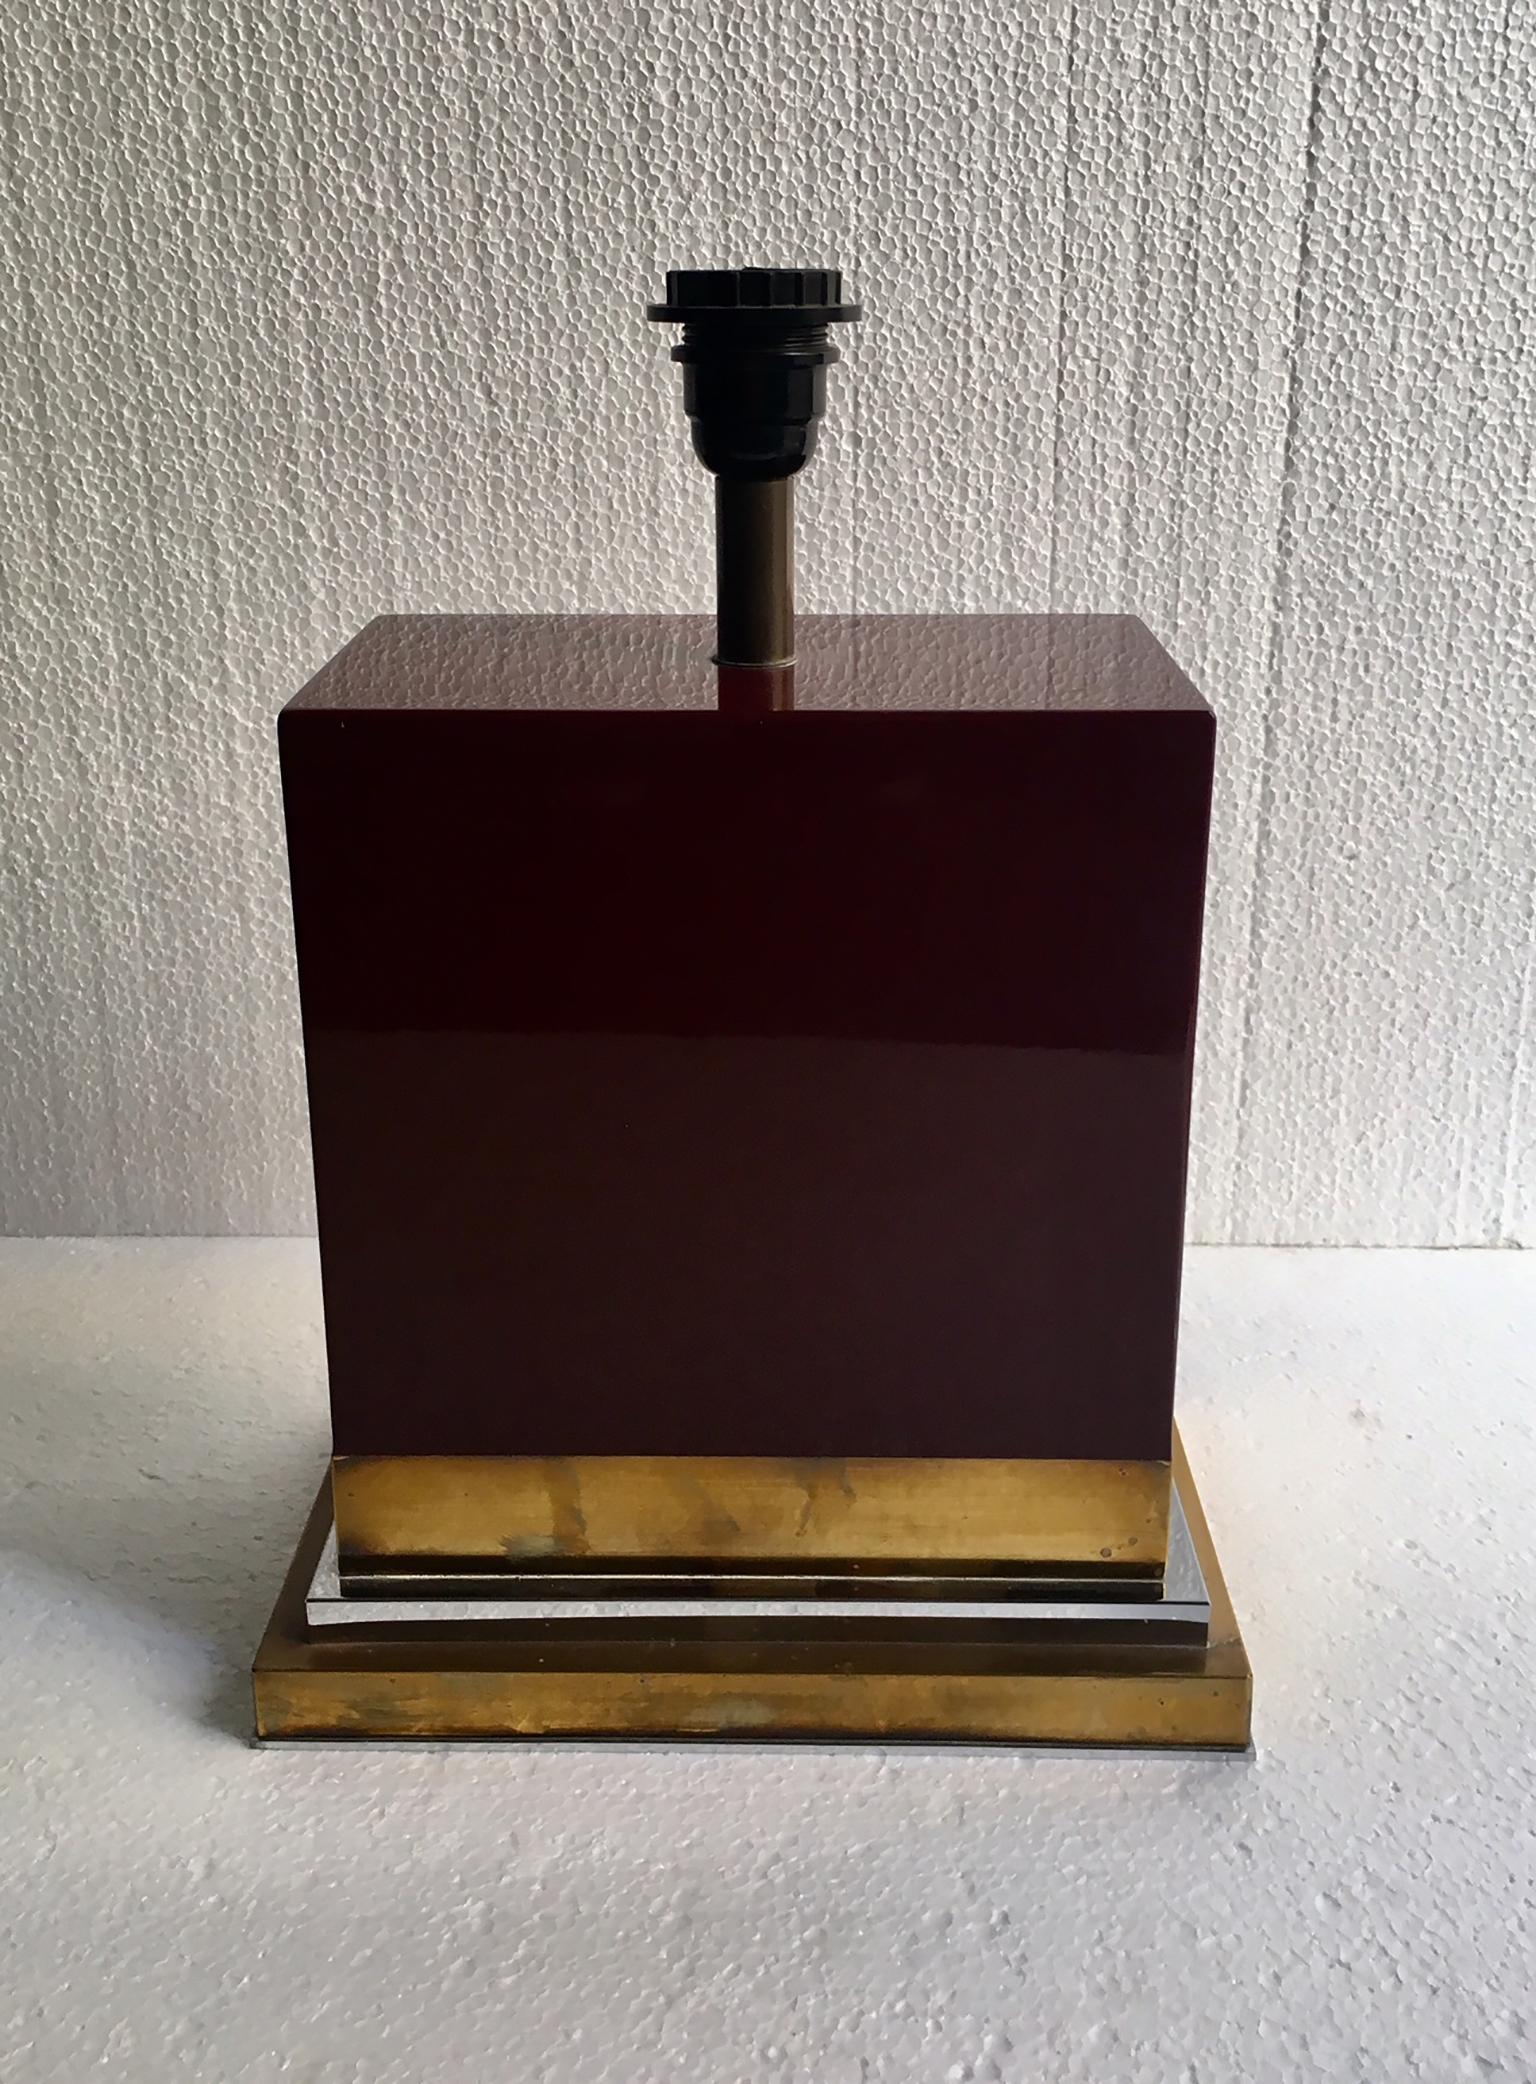 Lamp design by J.C.Mahey, in brass, and lacquered garnet wood. Chrome metal.
The measurements are of the base.